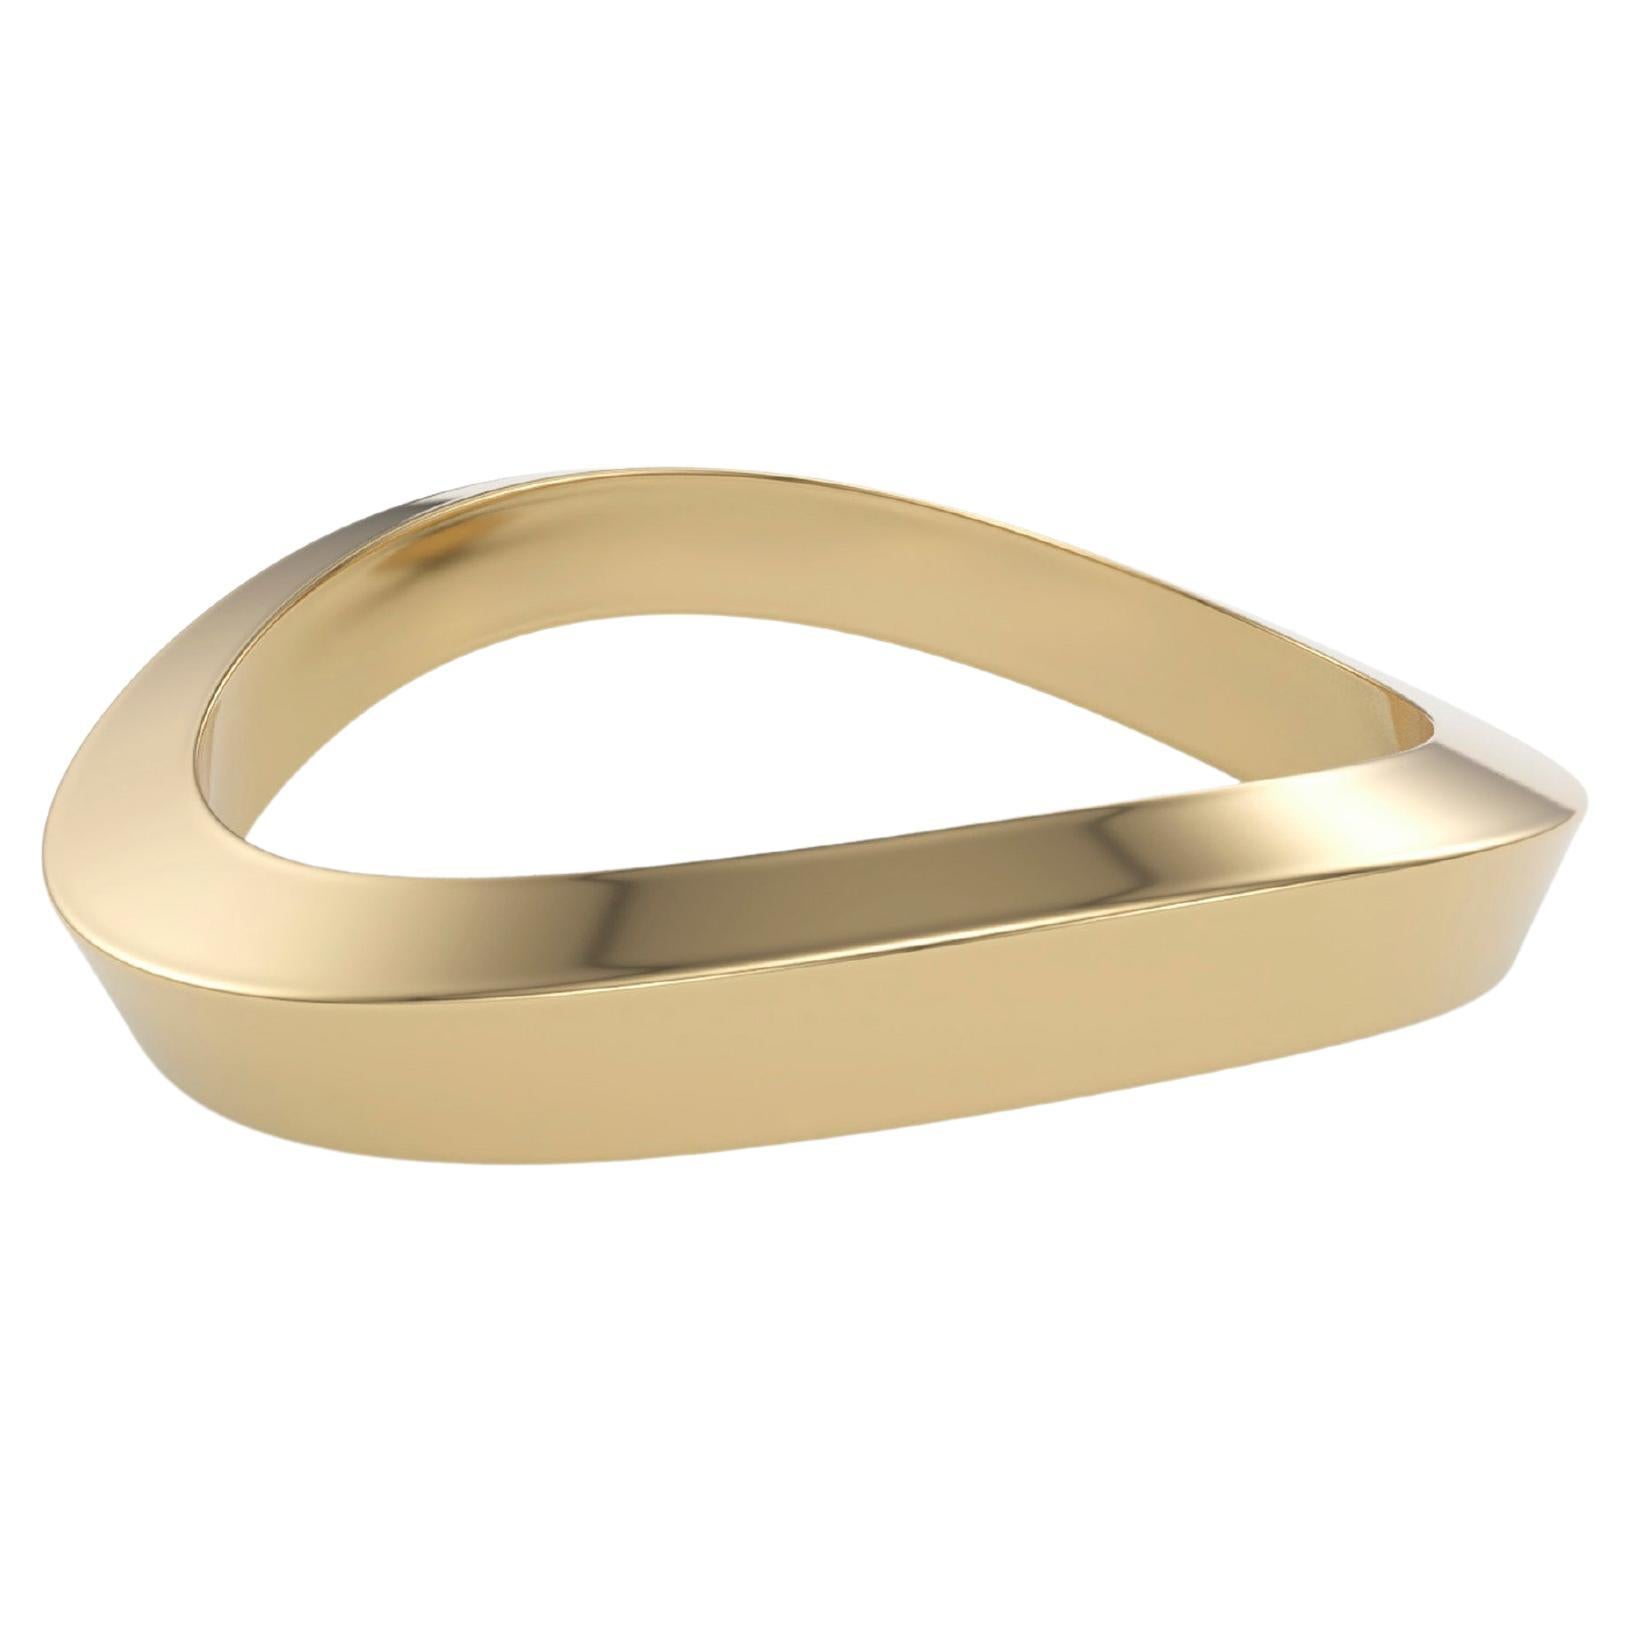 Casey Perez 18K Gold Band Stackable Ring-sz 6 For Sale